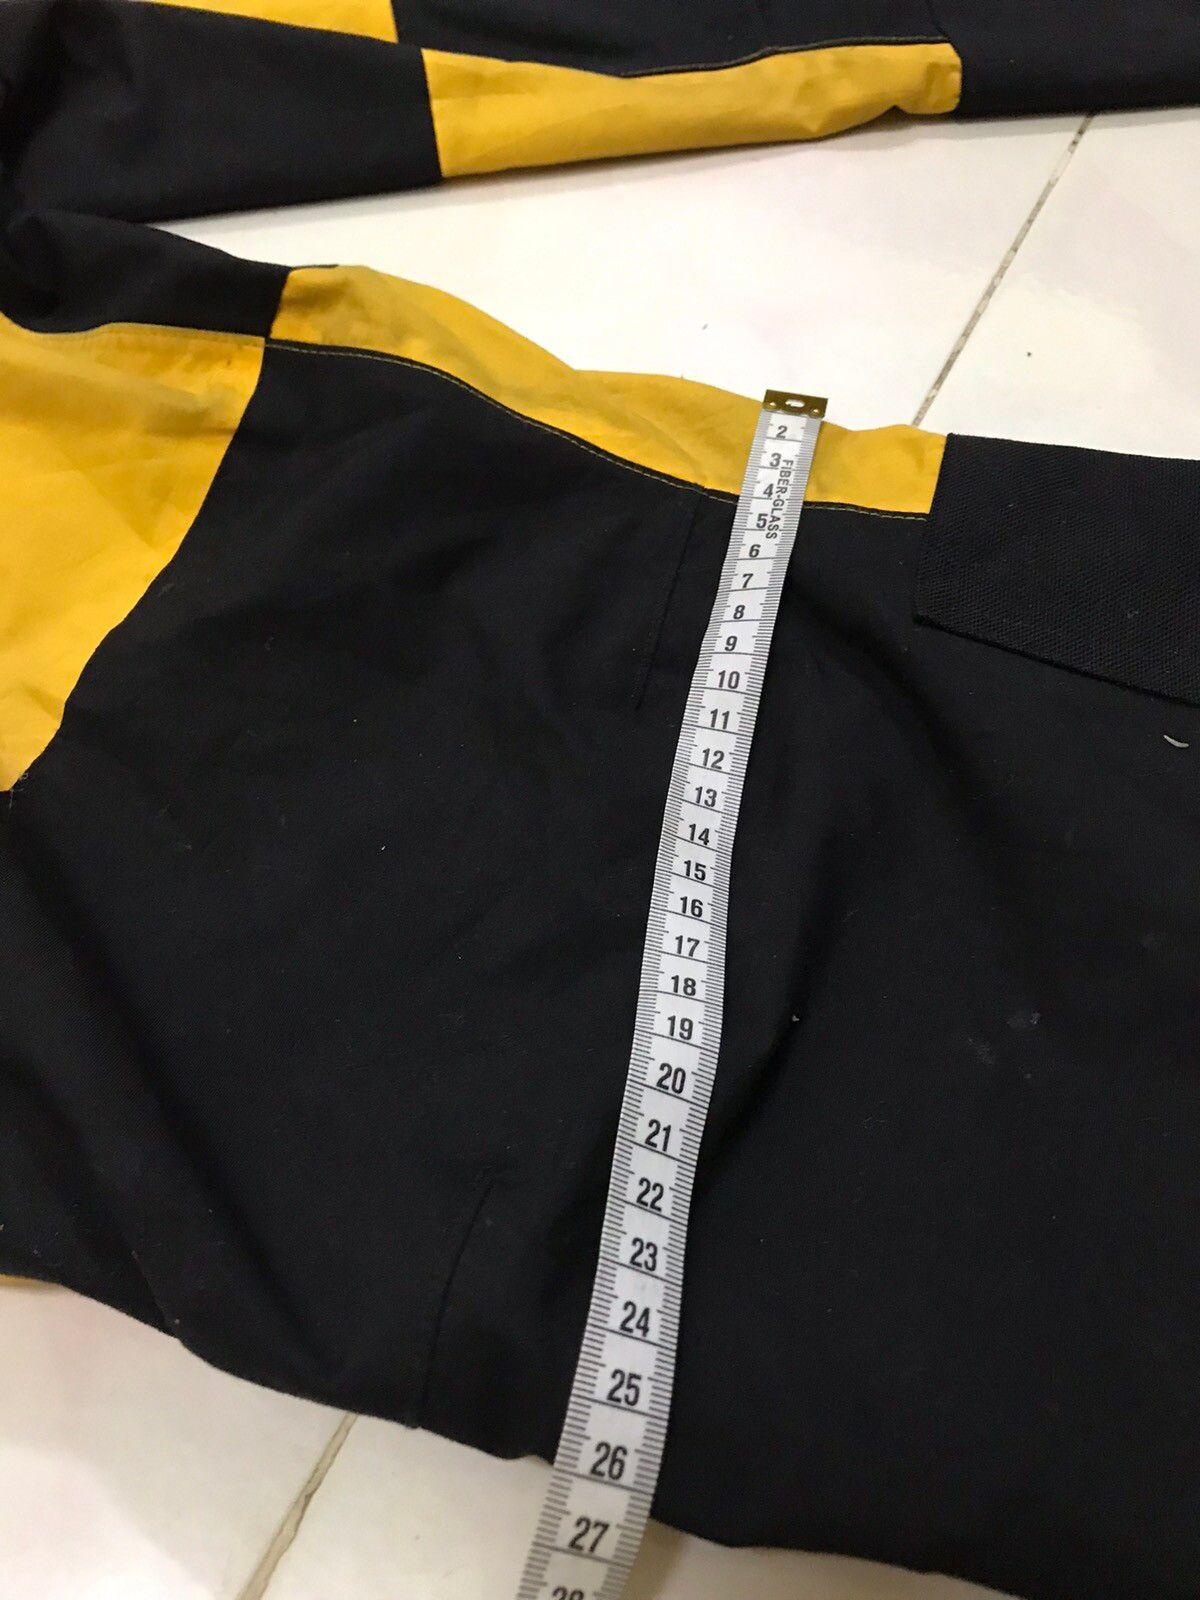 THE NORTH FACE” GORE-TEX SKI PANTS BIBS OVERALLS IN YELLOW - 15